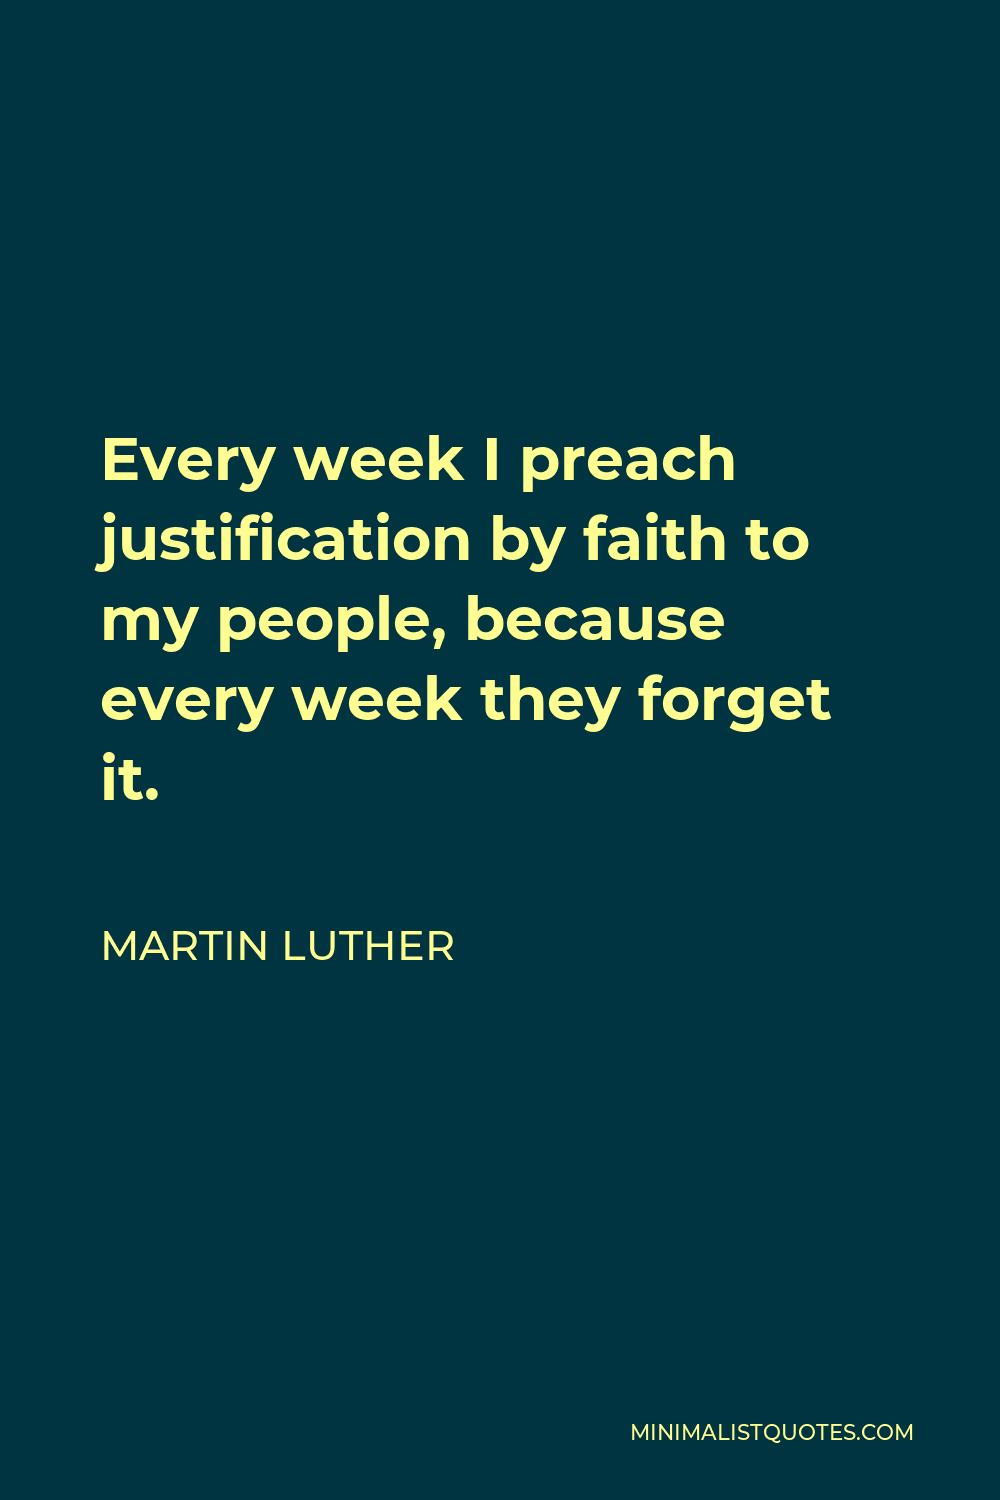 Martin Luther Quote - Every week I preach justification by faith to my people, because every week they forget it.